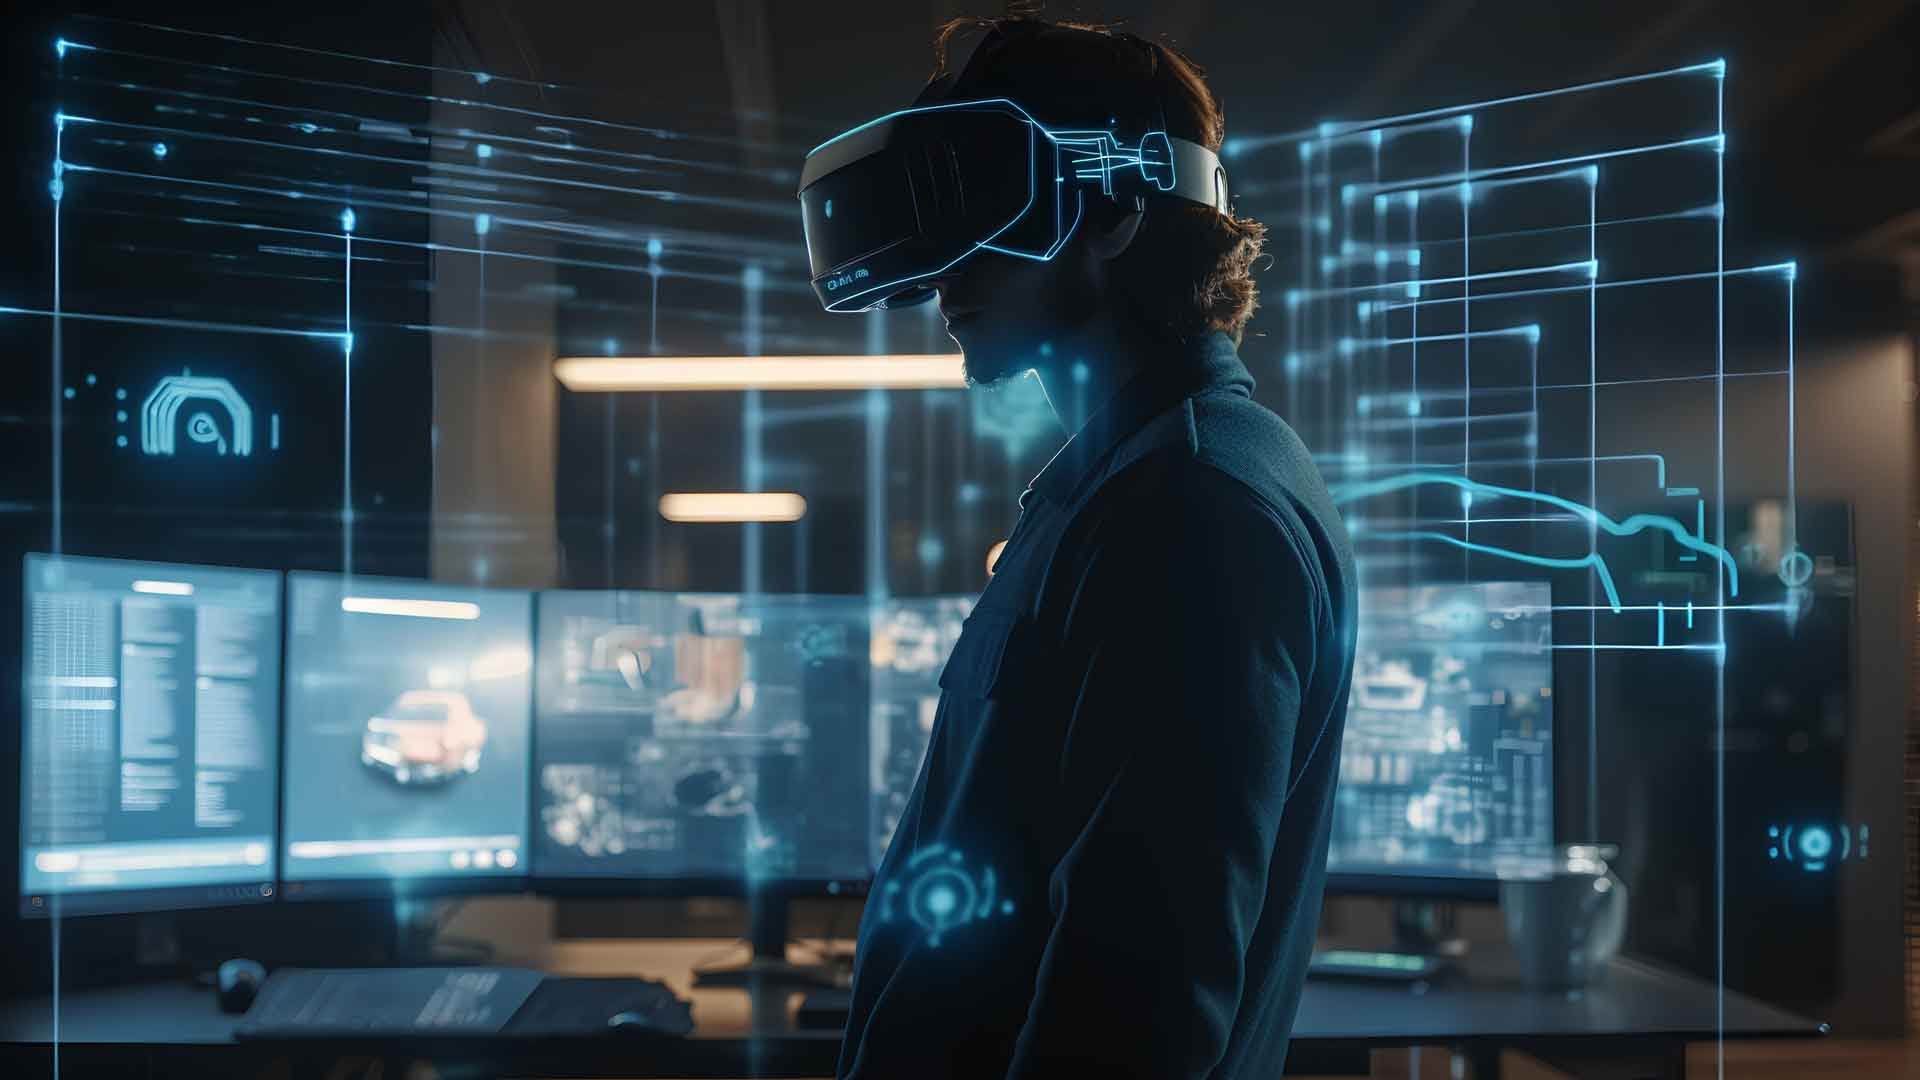 Engineer using extended reality (XR) technology